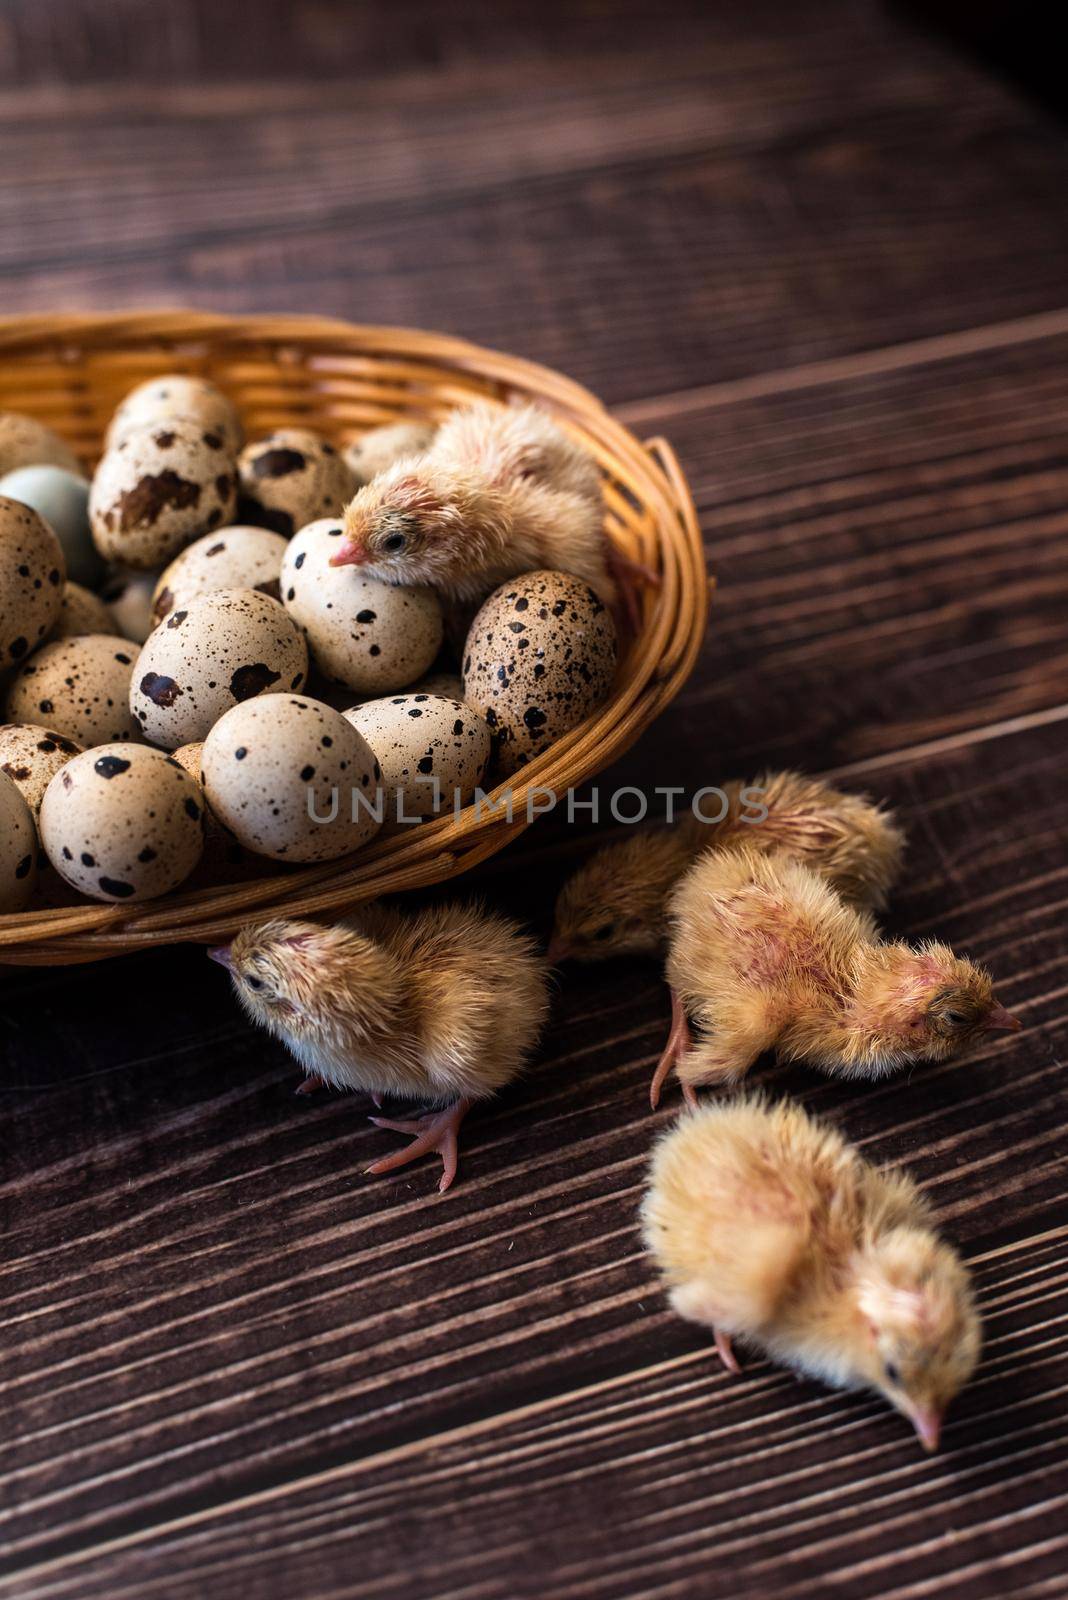 Newborn yellow baby chicks. The chick hatched from the egg. Chickens together with eggs background for poultry farm. by etonastenka